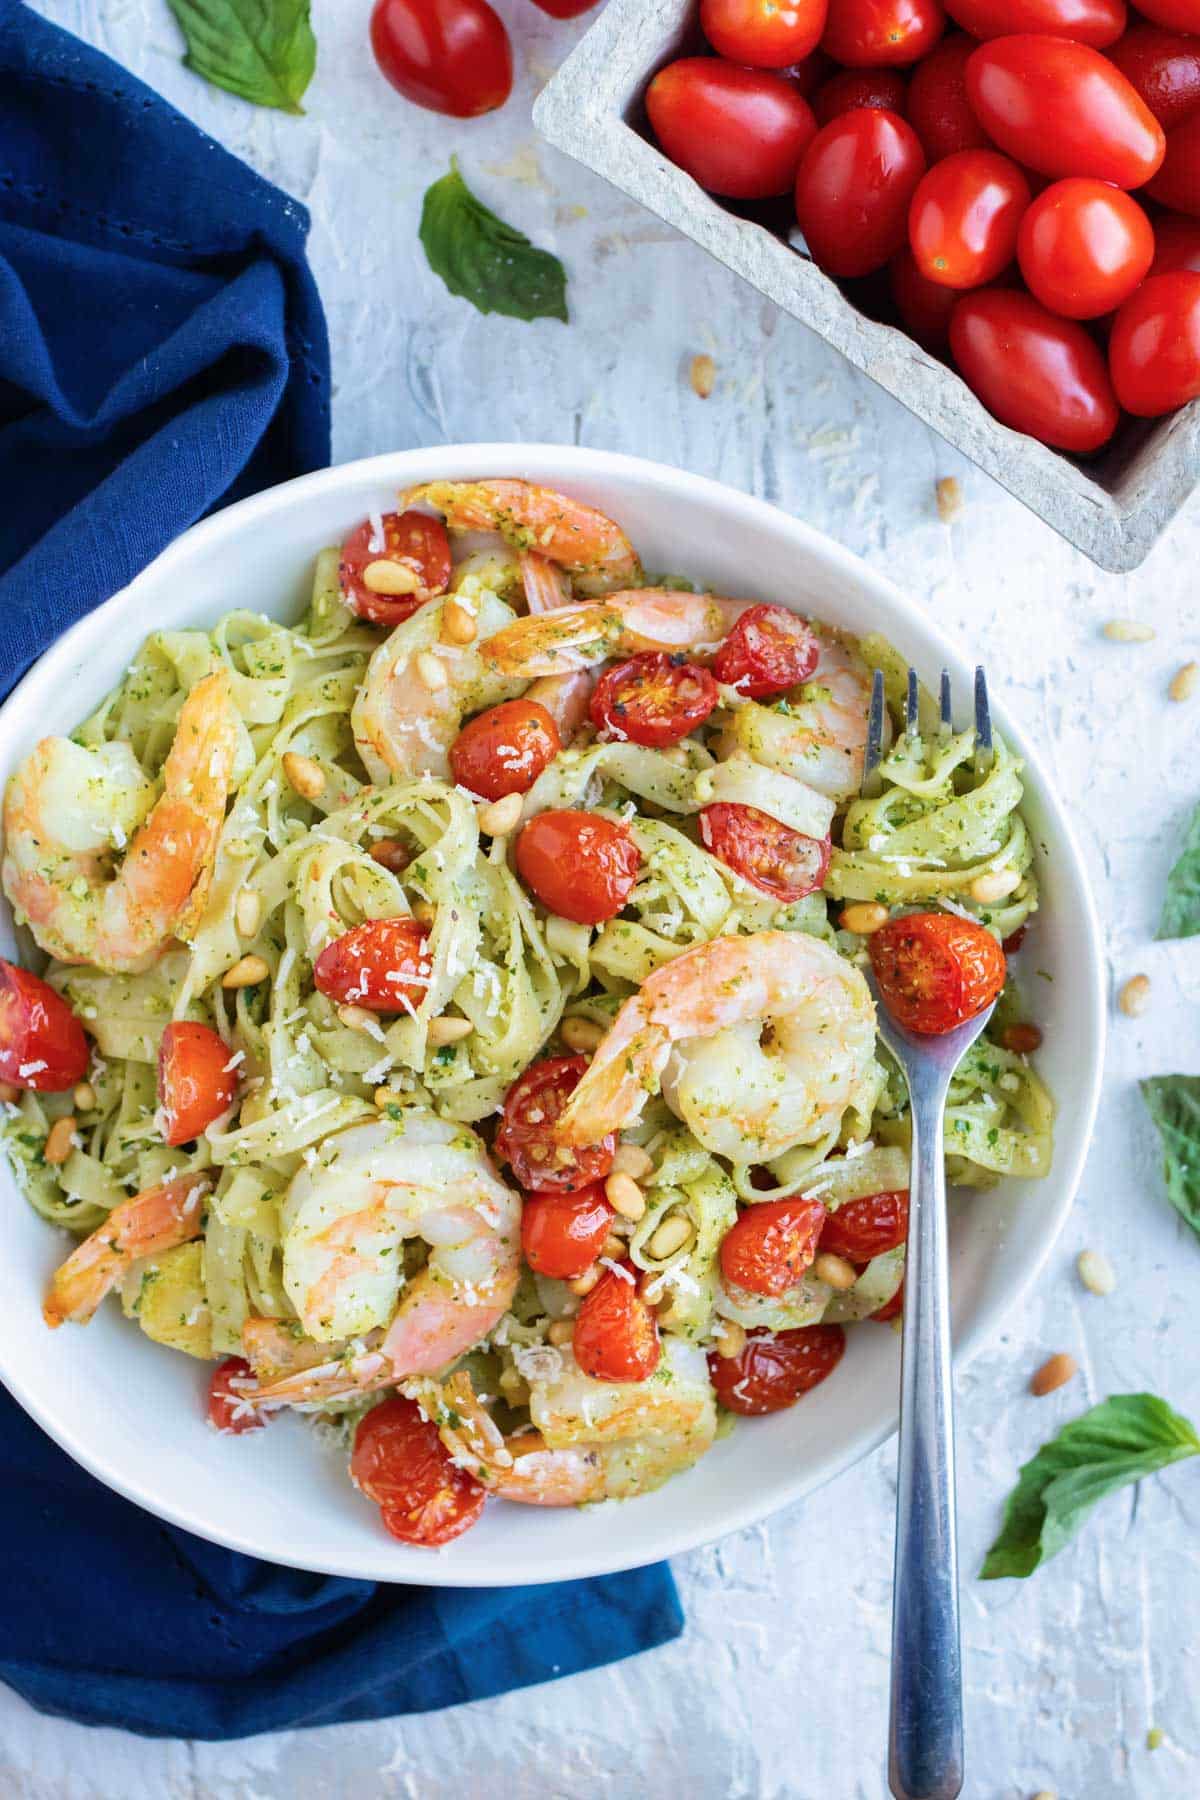 A healthy pesto pasta with shrimp, tomatoes, and pine nuts.